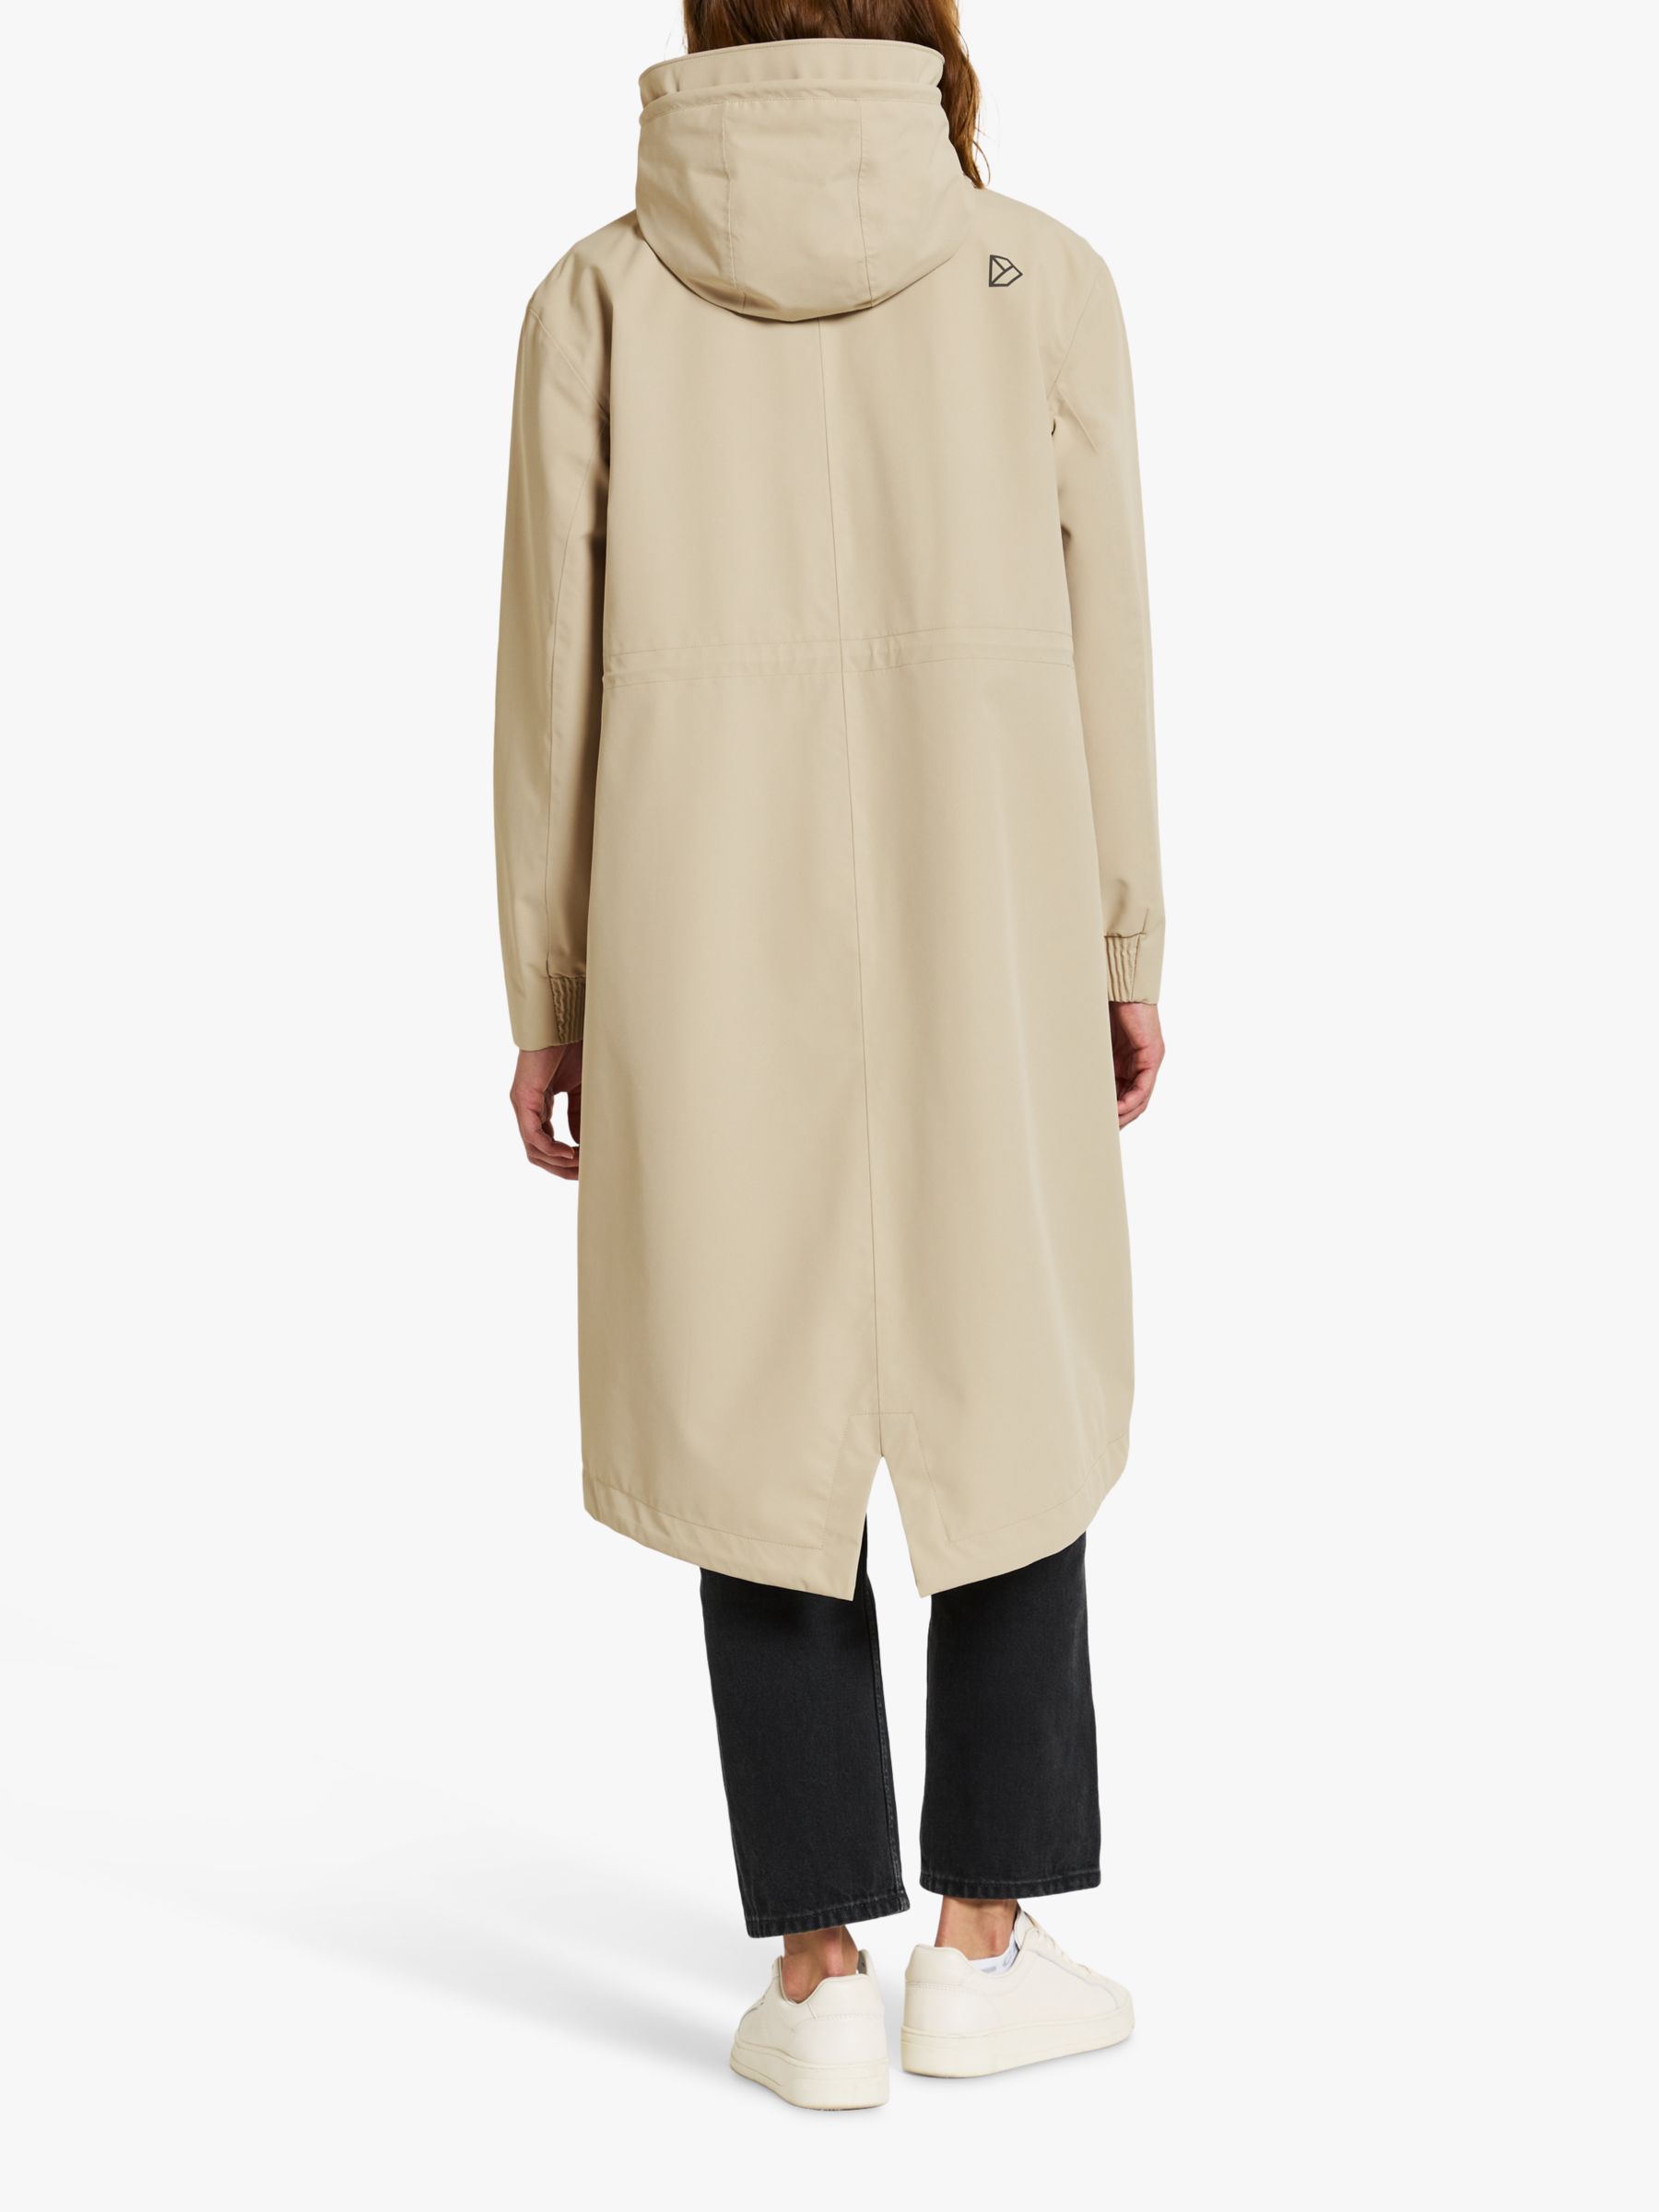 Didriksons Alice Parka Jacket, Clay Beige at John Lewis & Partners